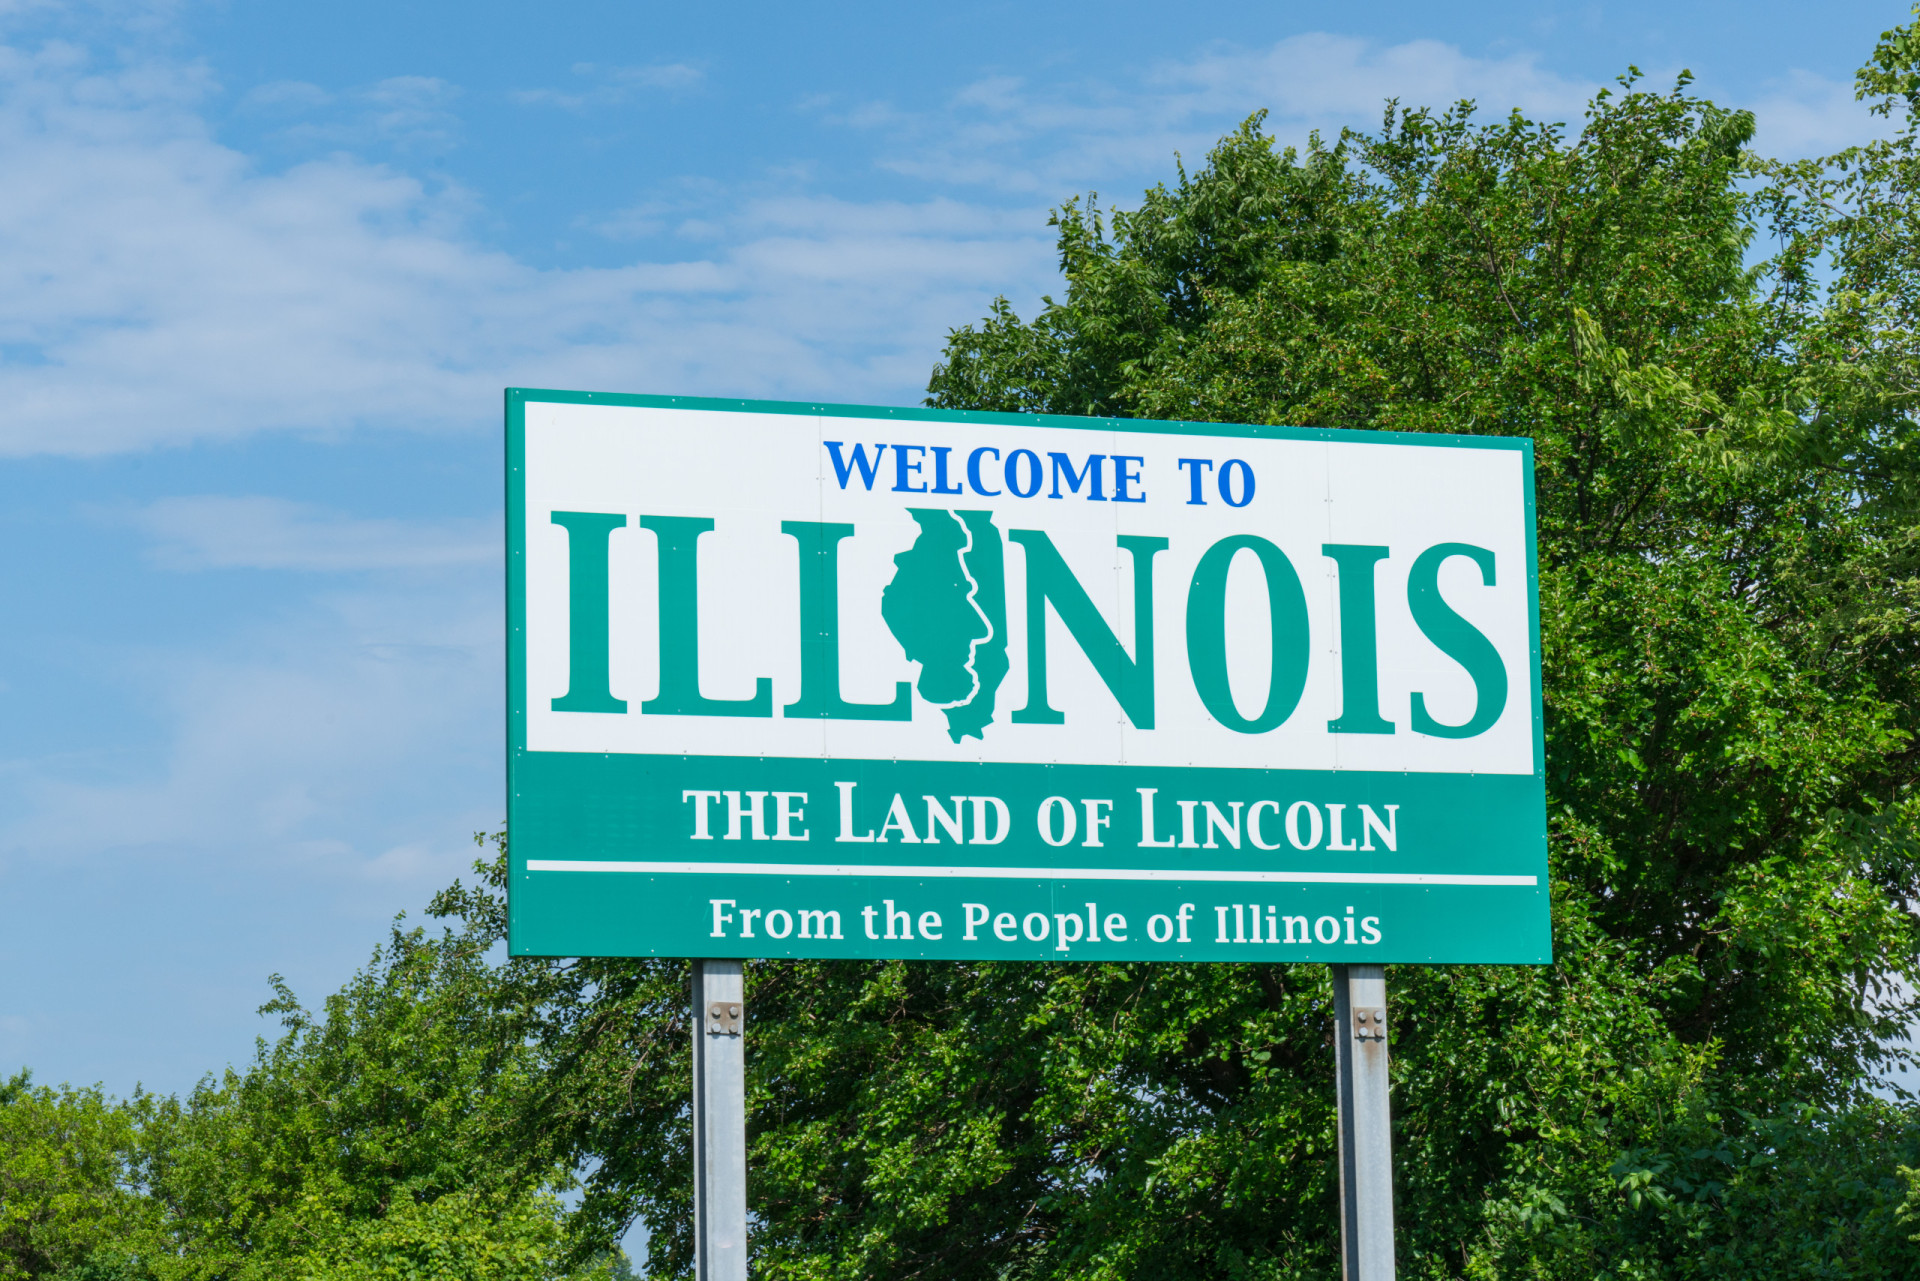 <p>Fun fact: Despite the slogan, Abraham Lincoln was not actually born in Illinois. The former US president did however call Illinois home, having moved to Springfield at age 21.</p><p><a href="https://www.msn.com/en-us/community/channel/vid-7xx8mnucu55yw63we9va2gwr7uihbxwc68fxqp25x6tg4ftibpra?cvid=94631541bc0f4f89bfd59158d696ad7e">Follow us and access great exclusive content every day</a></p>